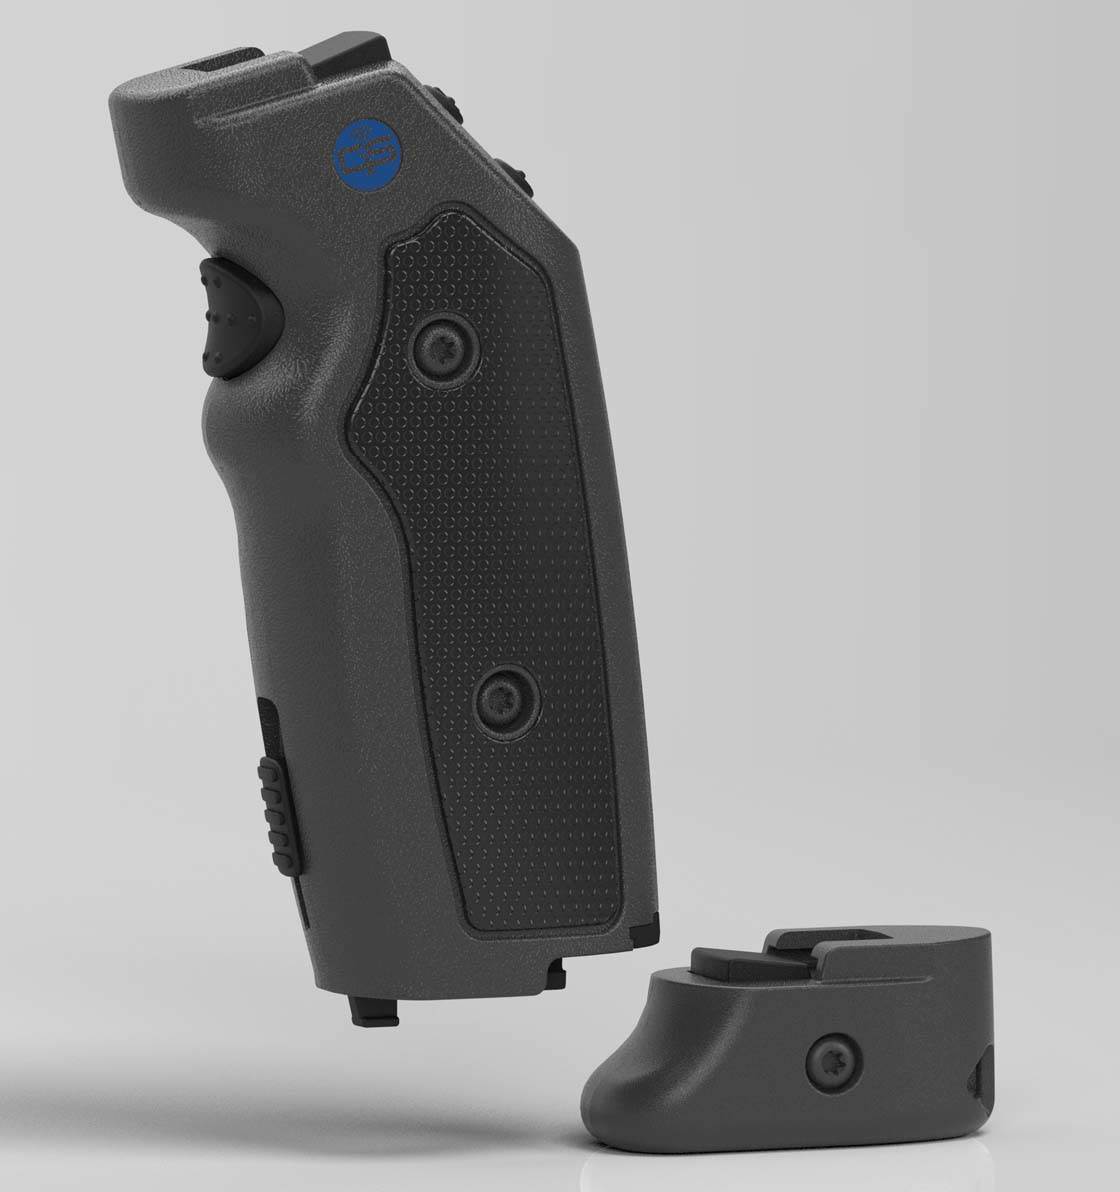 iPhone Grip And Shoot Accessory 11